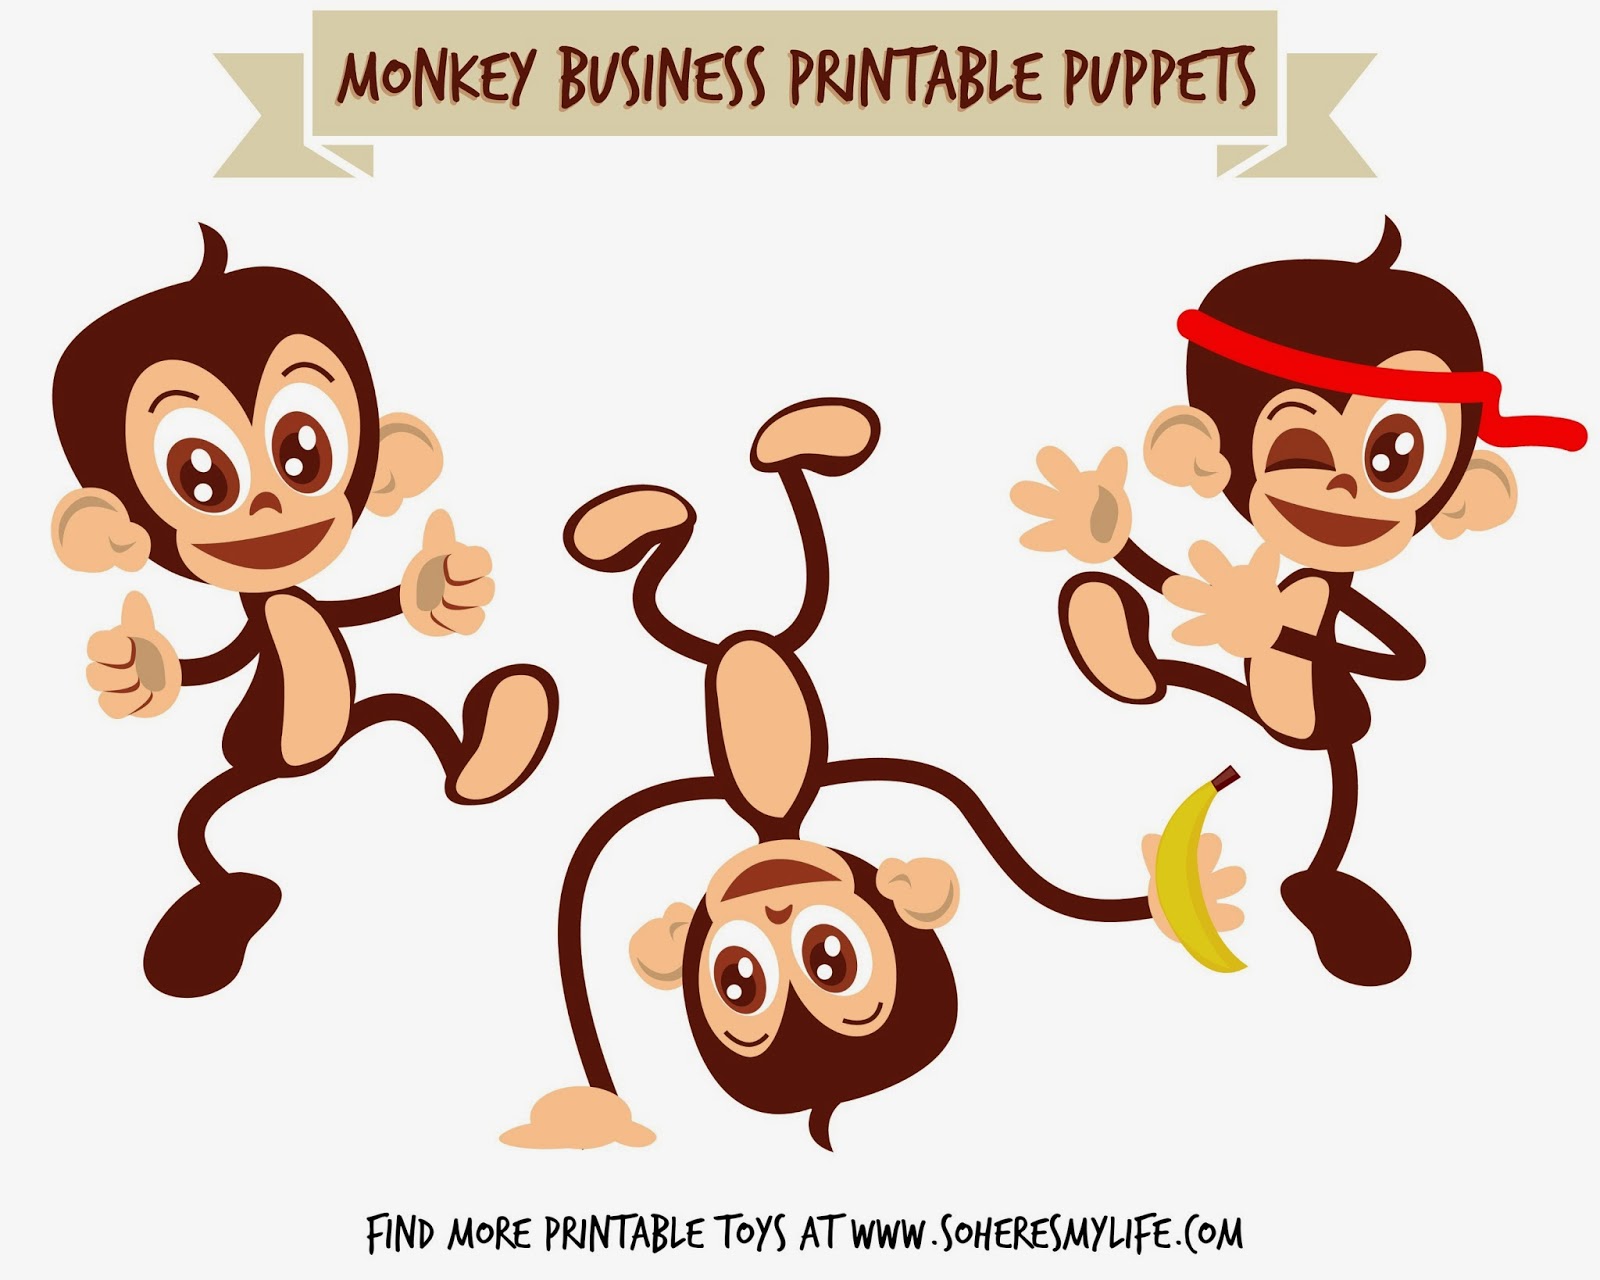 Free Monkey Printable Puppets from SoHeresMyLife.com - click through and get them